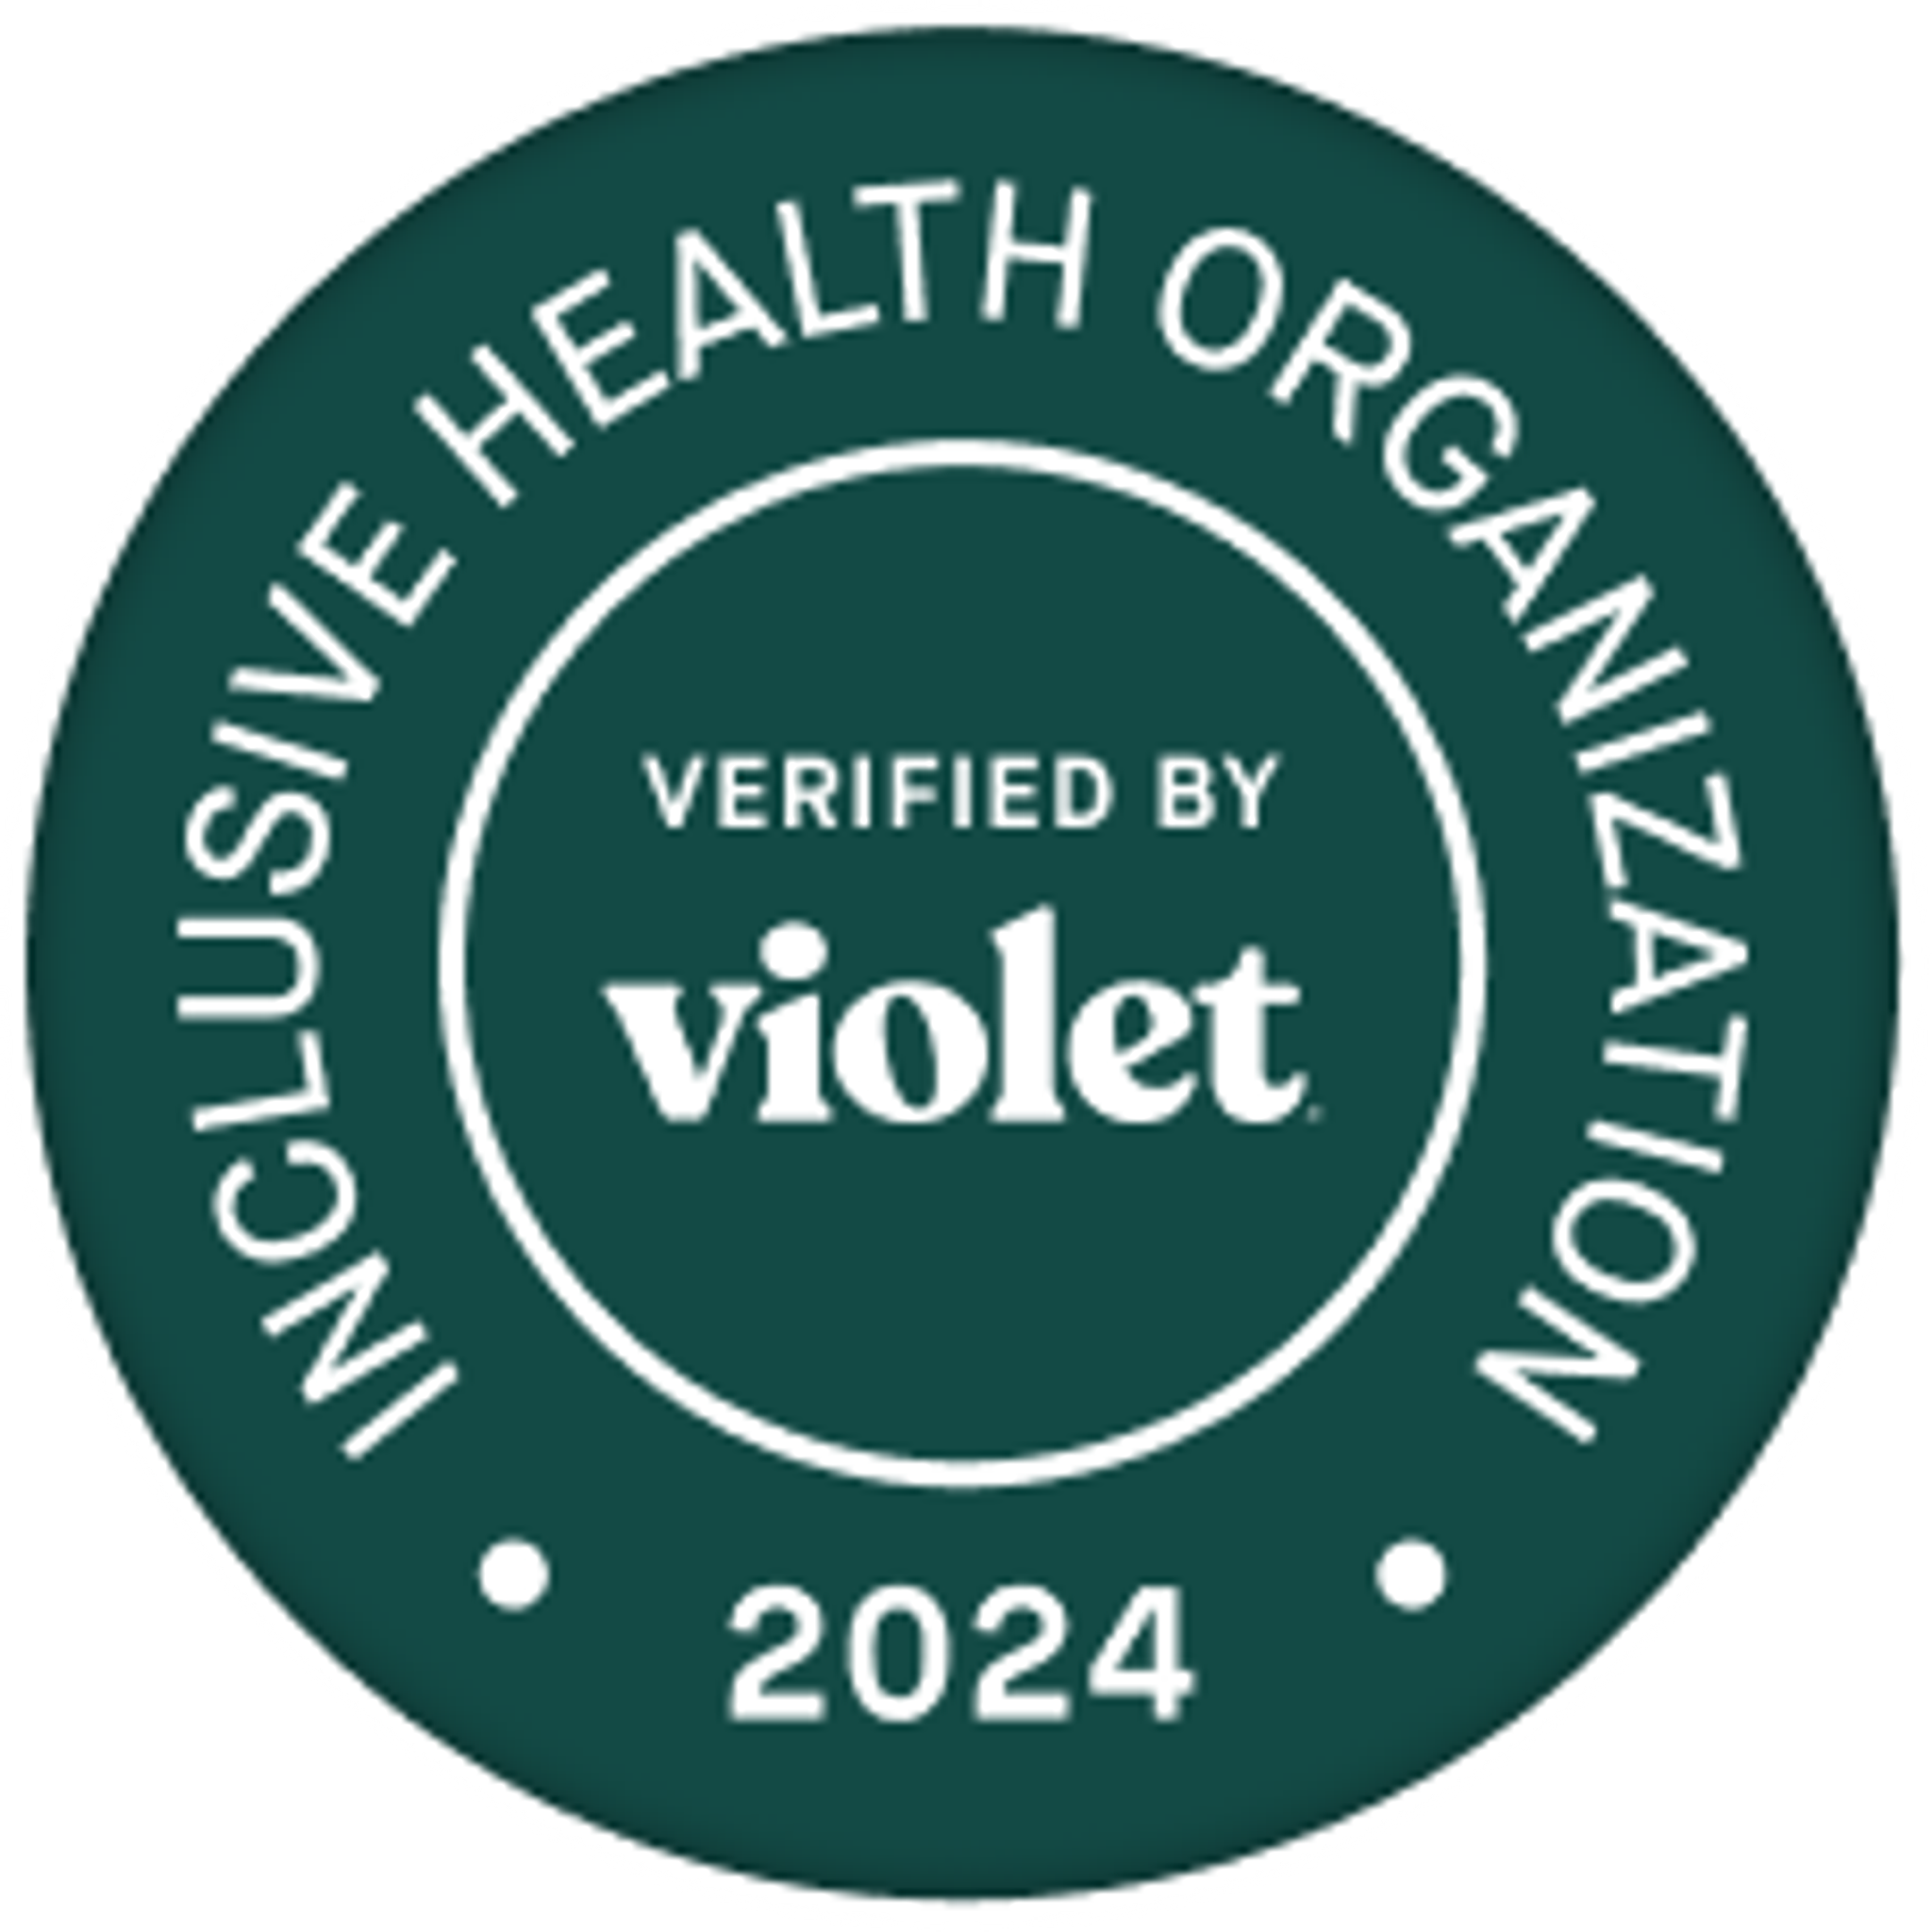 Badge of Inclusive Health Organization verified by Violet